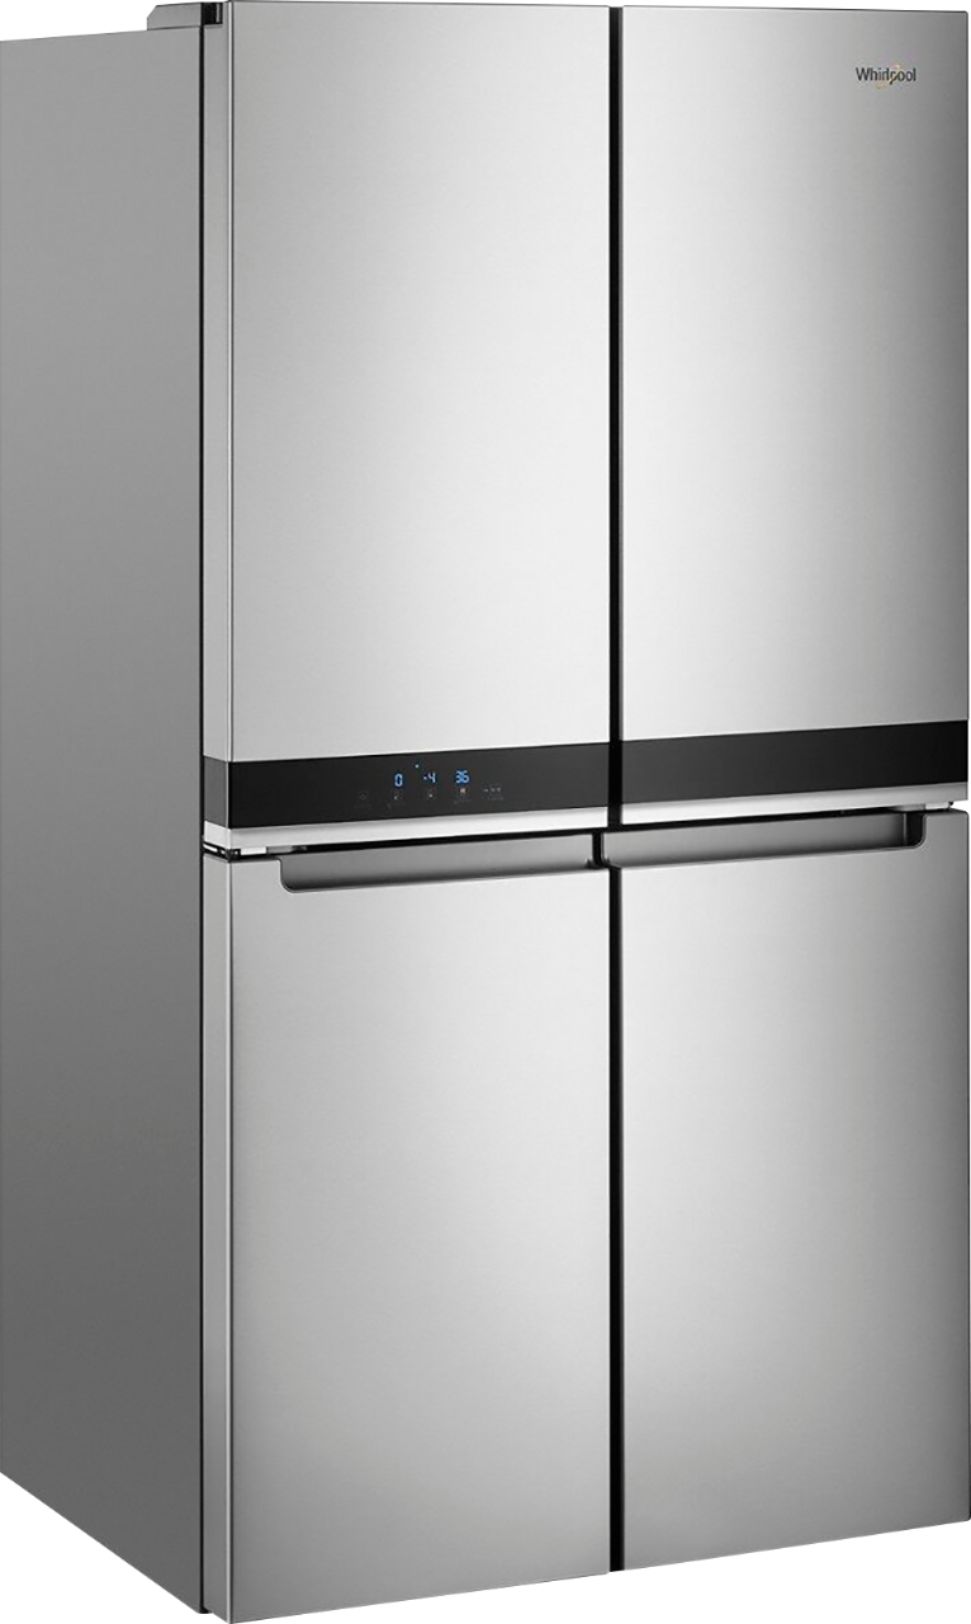 Angle View: Samsung - 17.5 cu. ft. Counter Depth 3-Door French Door Refrigerator with WiFi and Twin Cooling Plus® - White